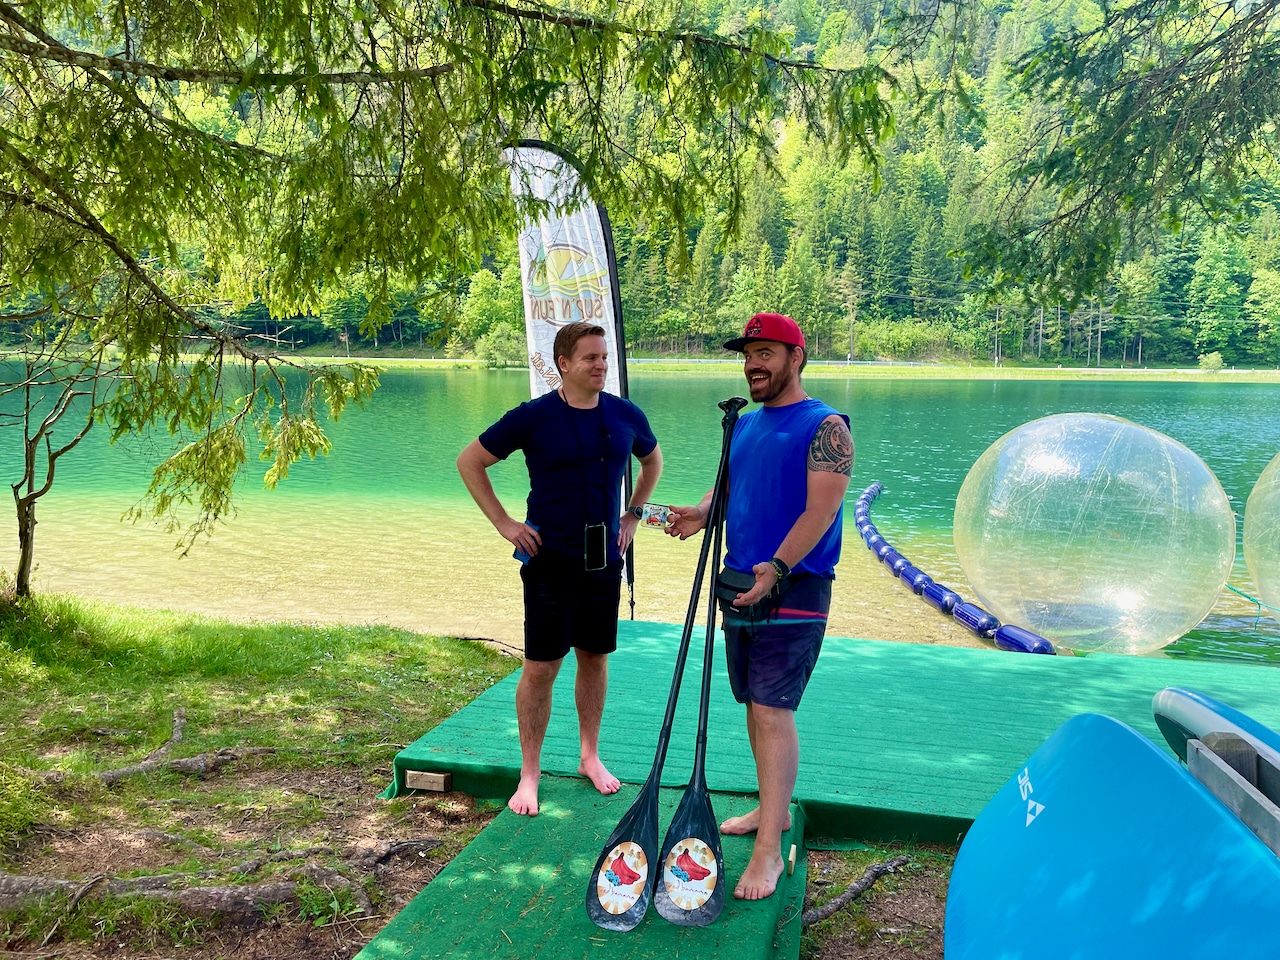 SUP fans talking shop: Danny Bulthé, owner of SUP'n Fun and Sascha Tegtmeyer from Just Wanderlust. SUP on the Pillersee Experience report Stand Up Paddling